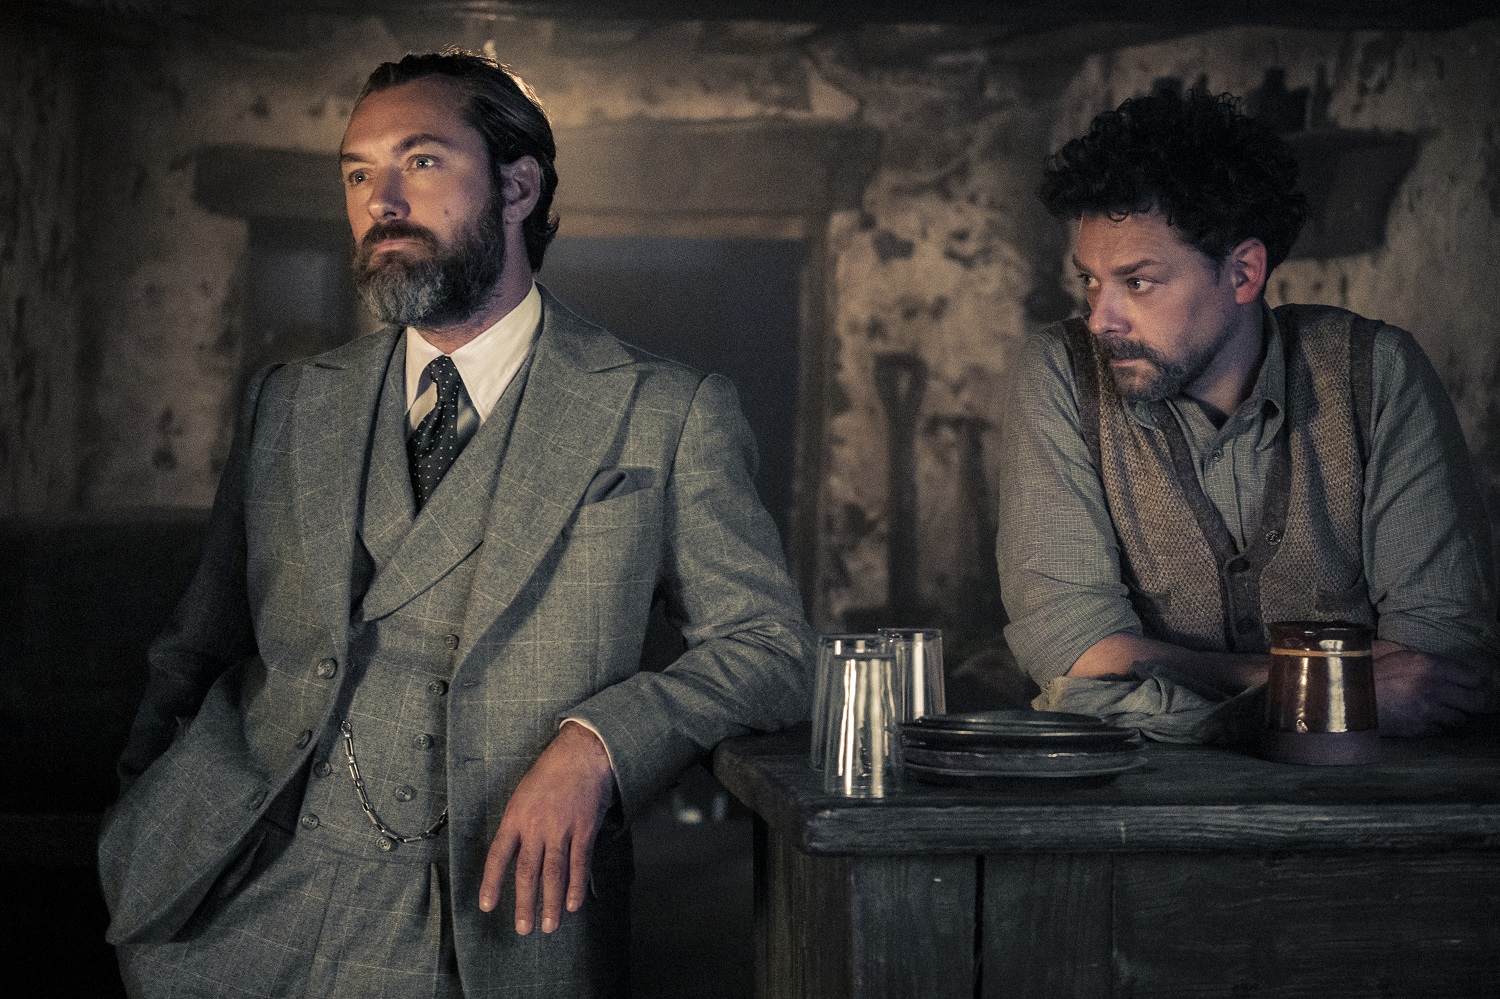 JUDE LAW as Albus Dumbledore and RICHARD COYLE as Aberforth in Warner Bros. Pictures' fantasy adventure "FANTASTIC BEASTS: THE SECRETS OF DUMBLEDORE,” a Warner Bros. Pictures release.